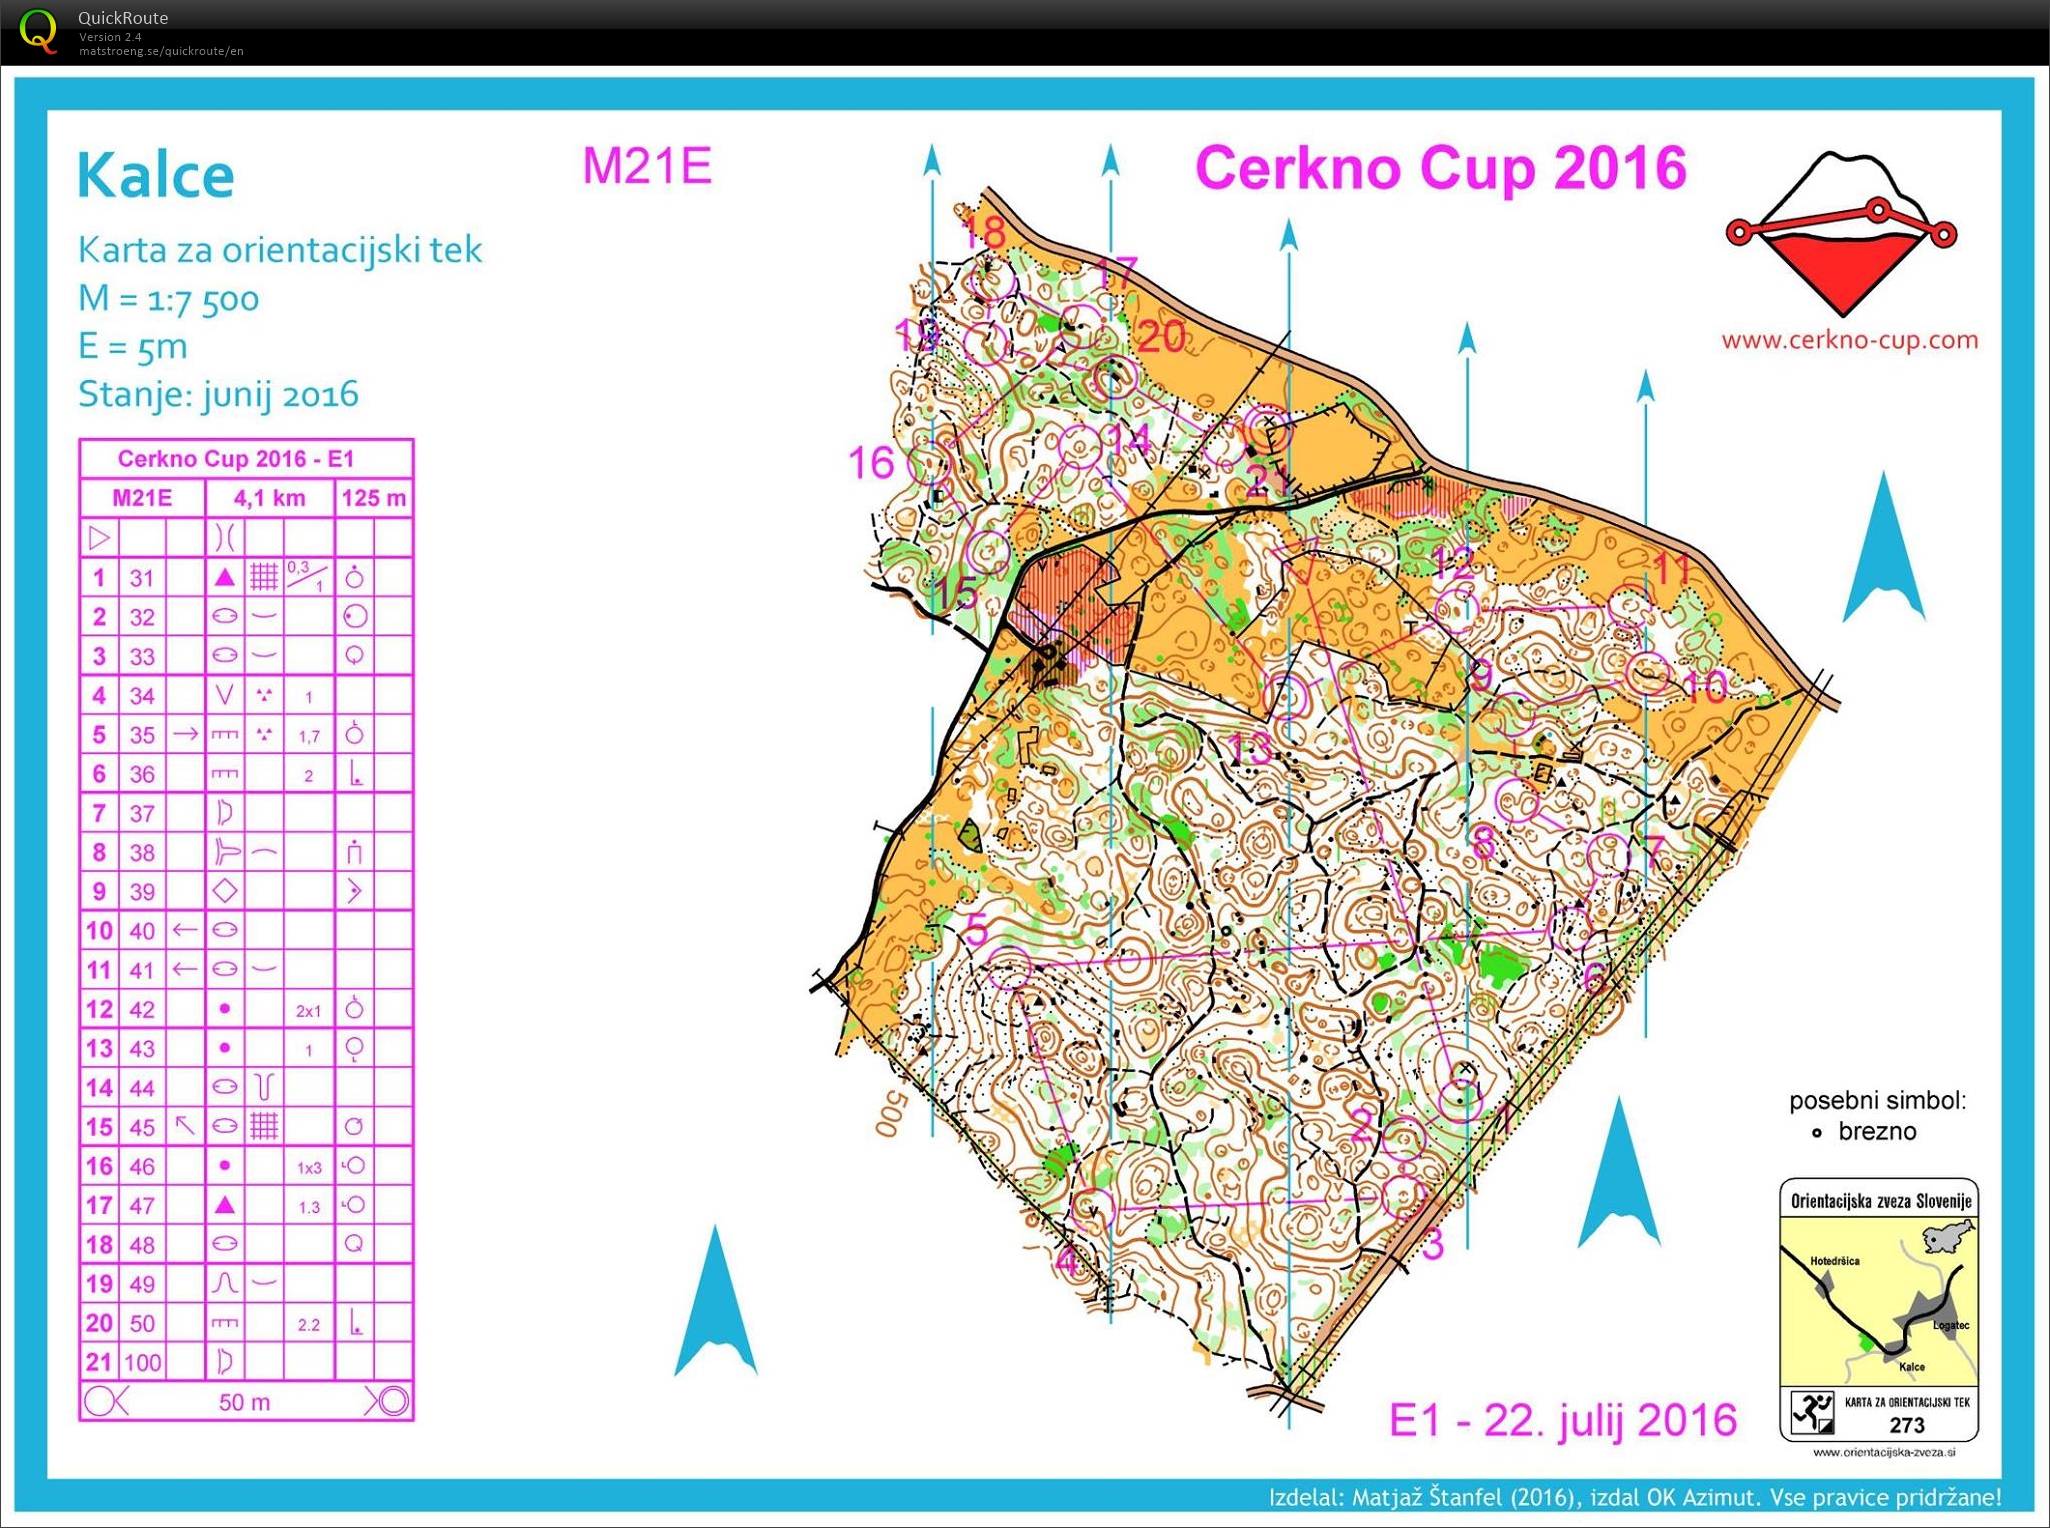 Cerkno Cup stage 1 (22-07-2016)